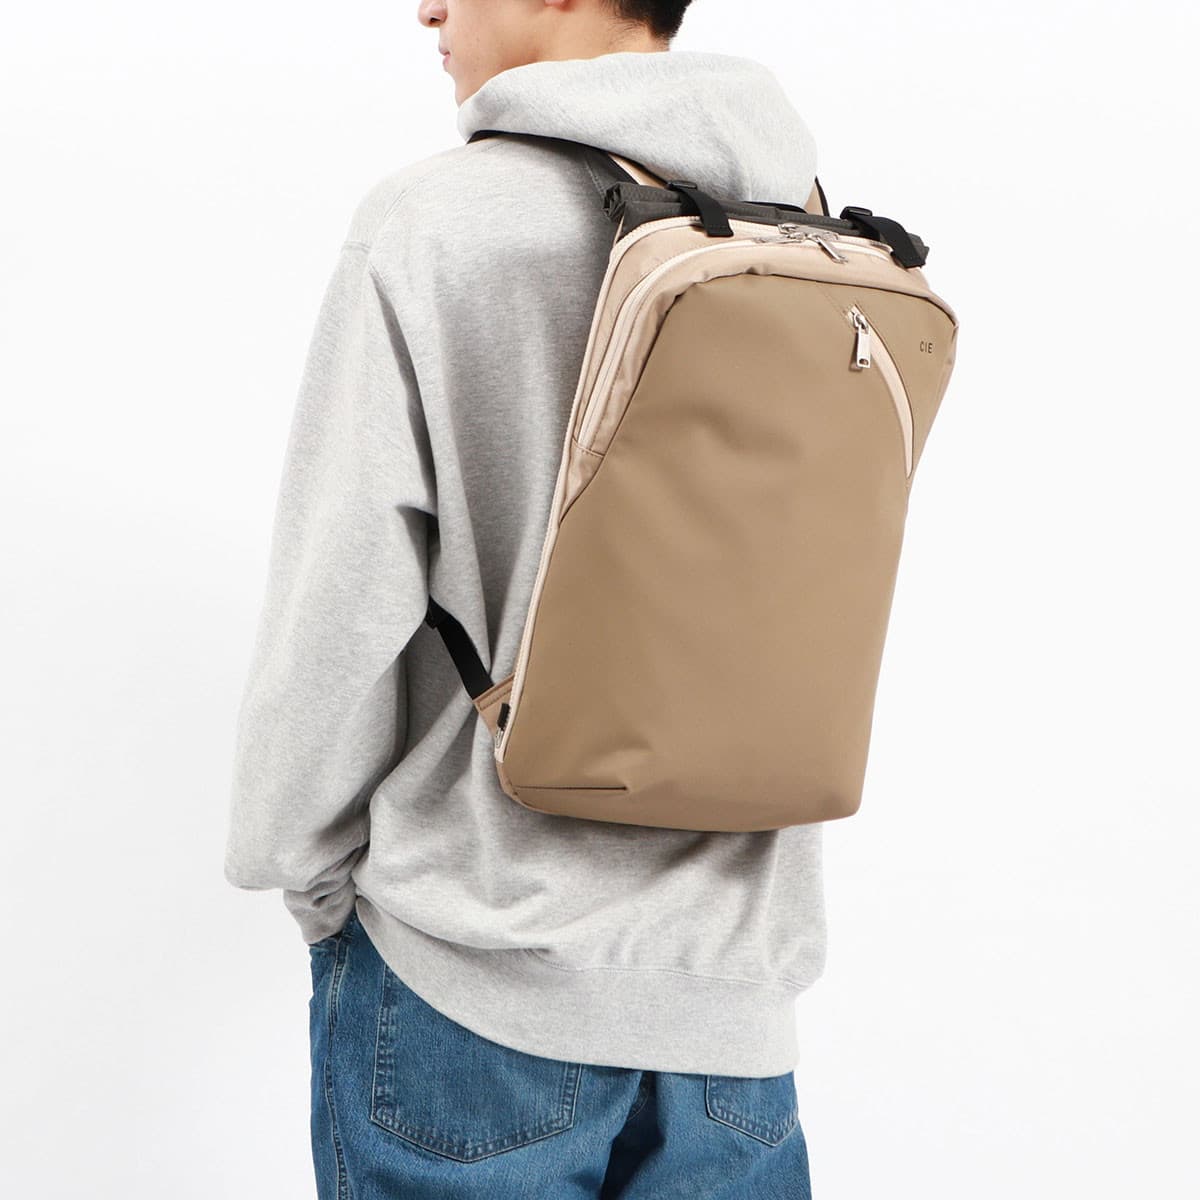 CIE シー VARIOUS BACKPACK 02 S リュック 021823｜【正規販売店